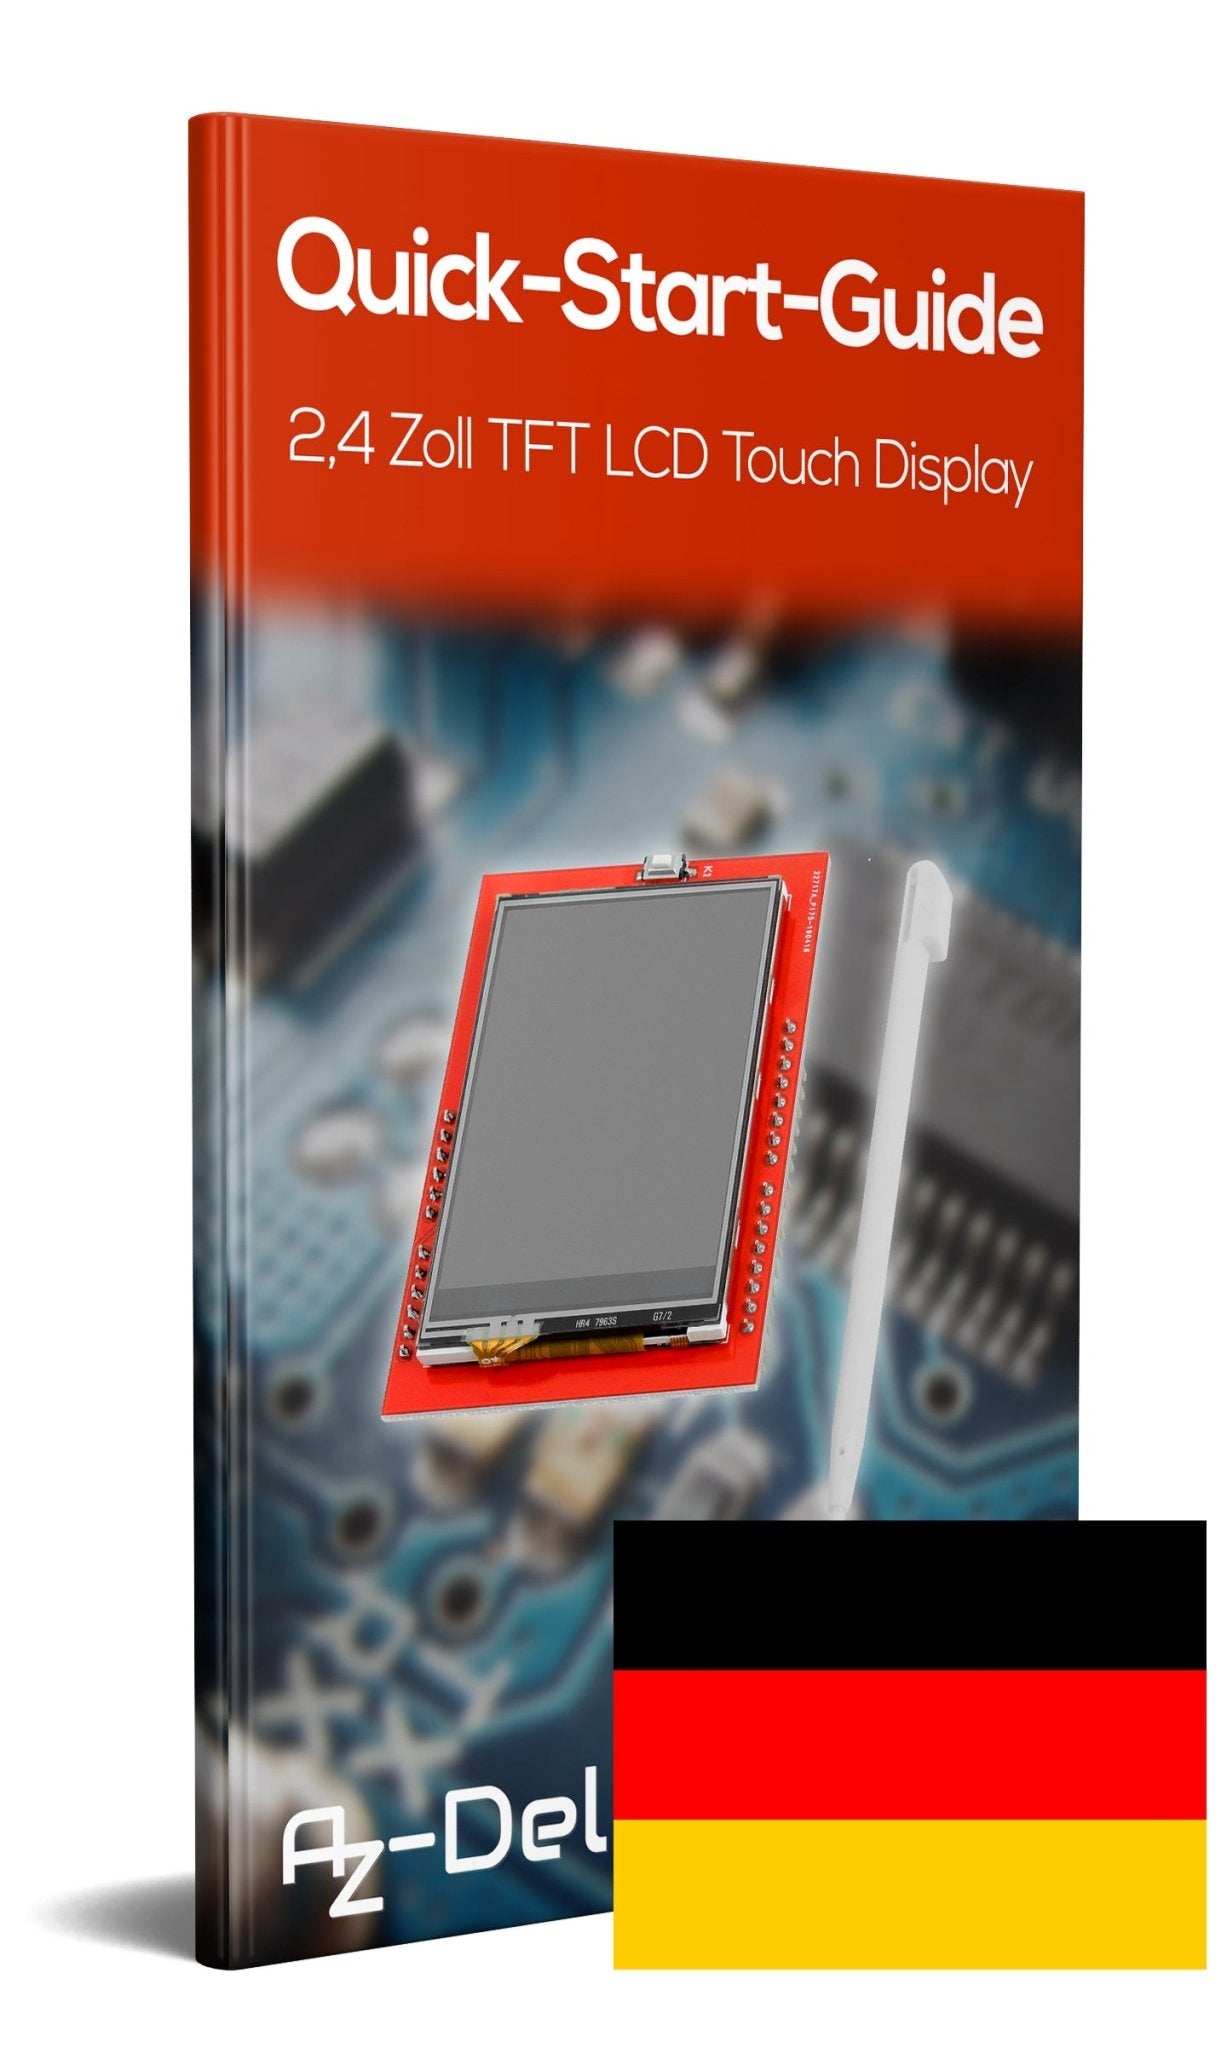 2.4 inch TFT LCD Touch Display